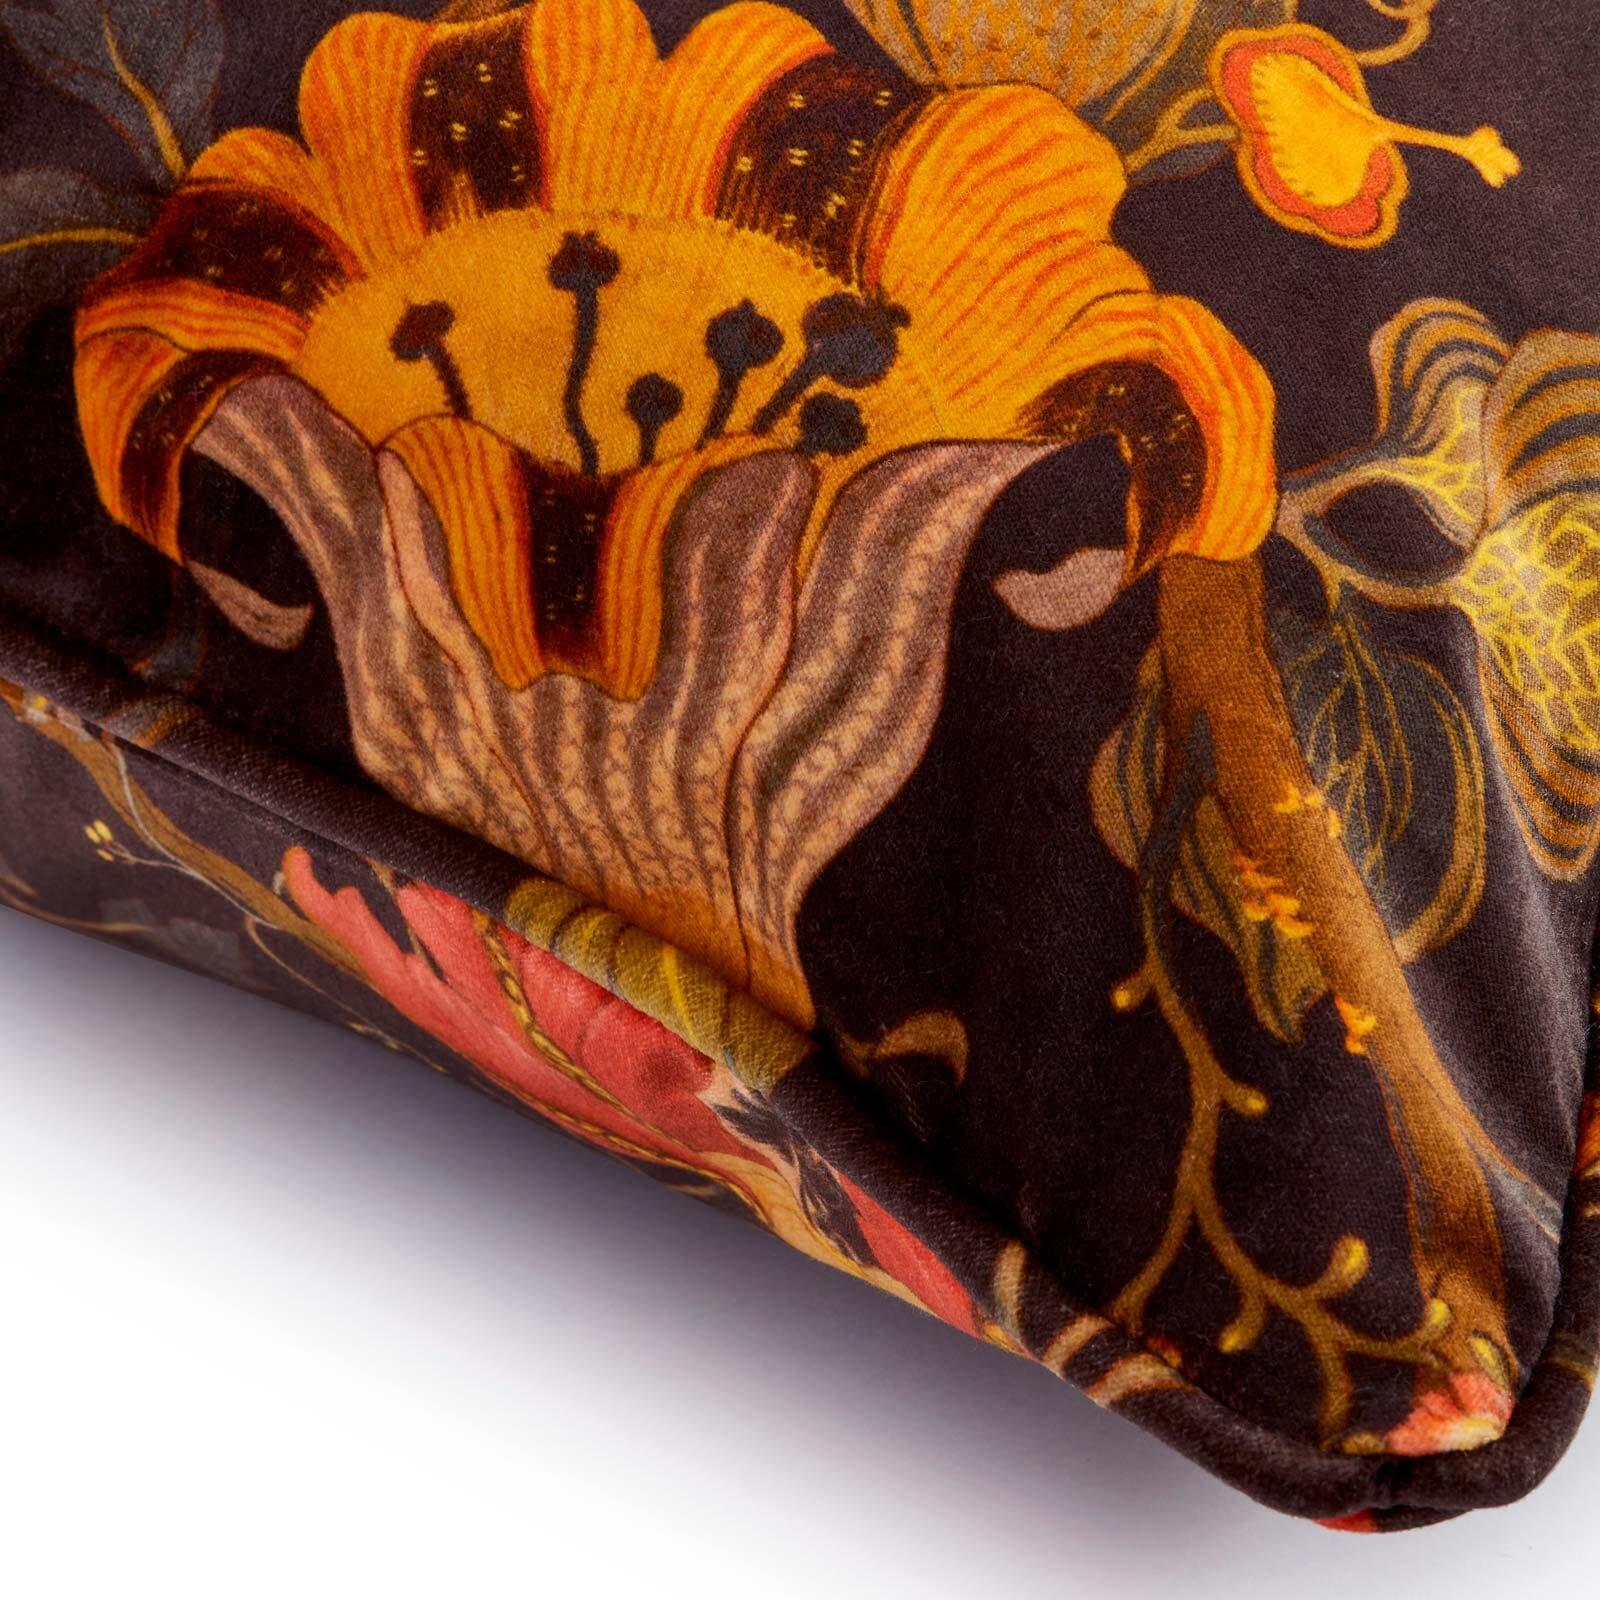 This luxury British velvet cushion features the intricate ARTEMIS print, a design that pays homage to William Morris by playing on the heightened psychedelic and non-conformist aesthetic he became known for. In this colourway, an array of